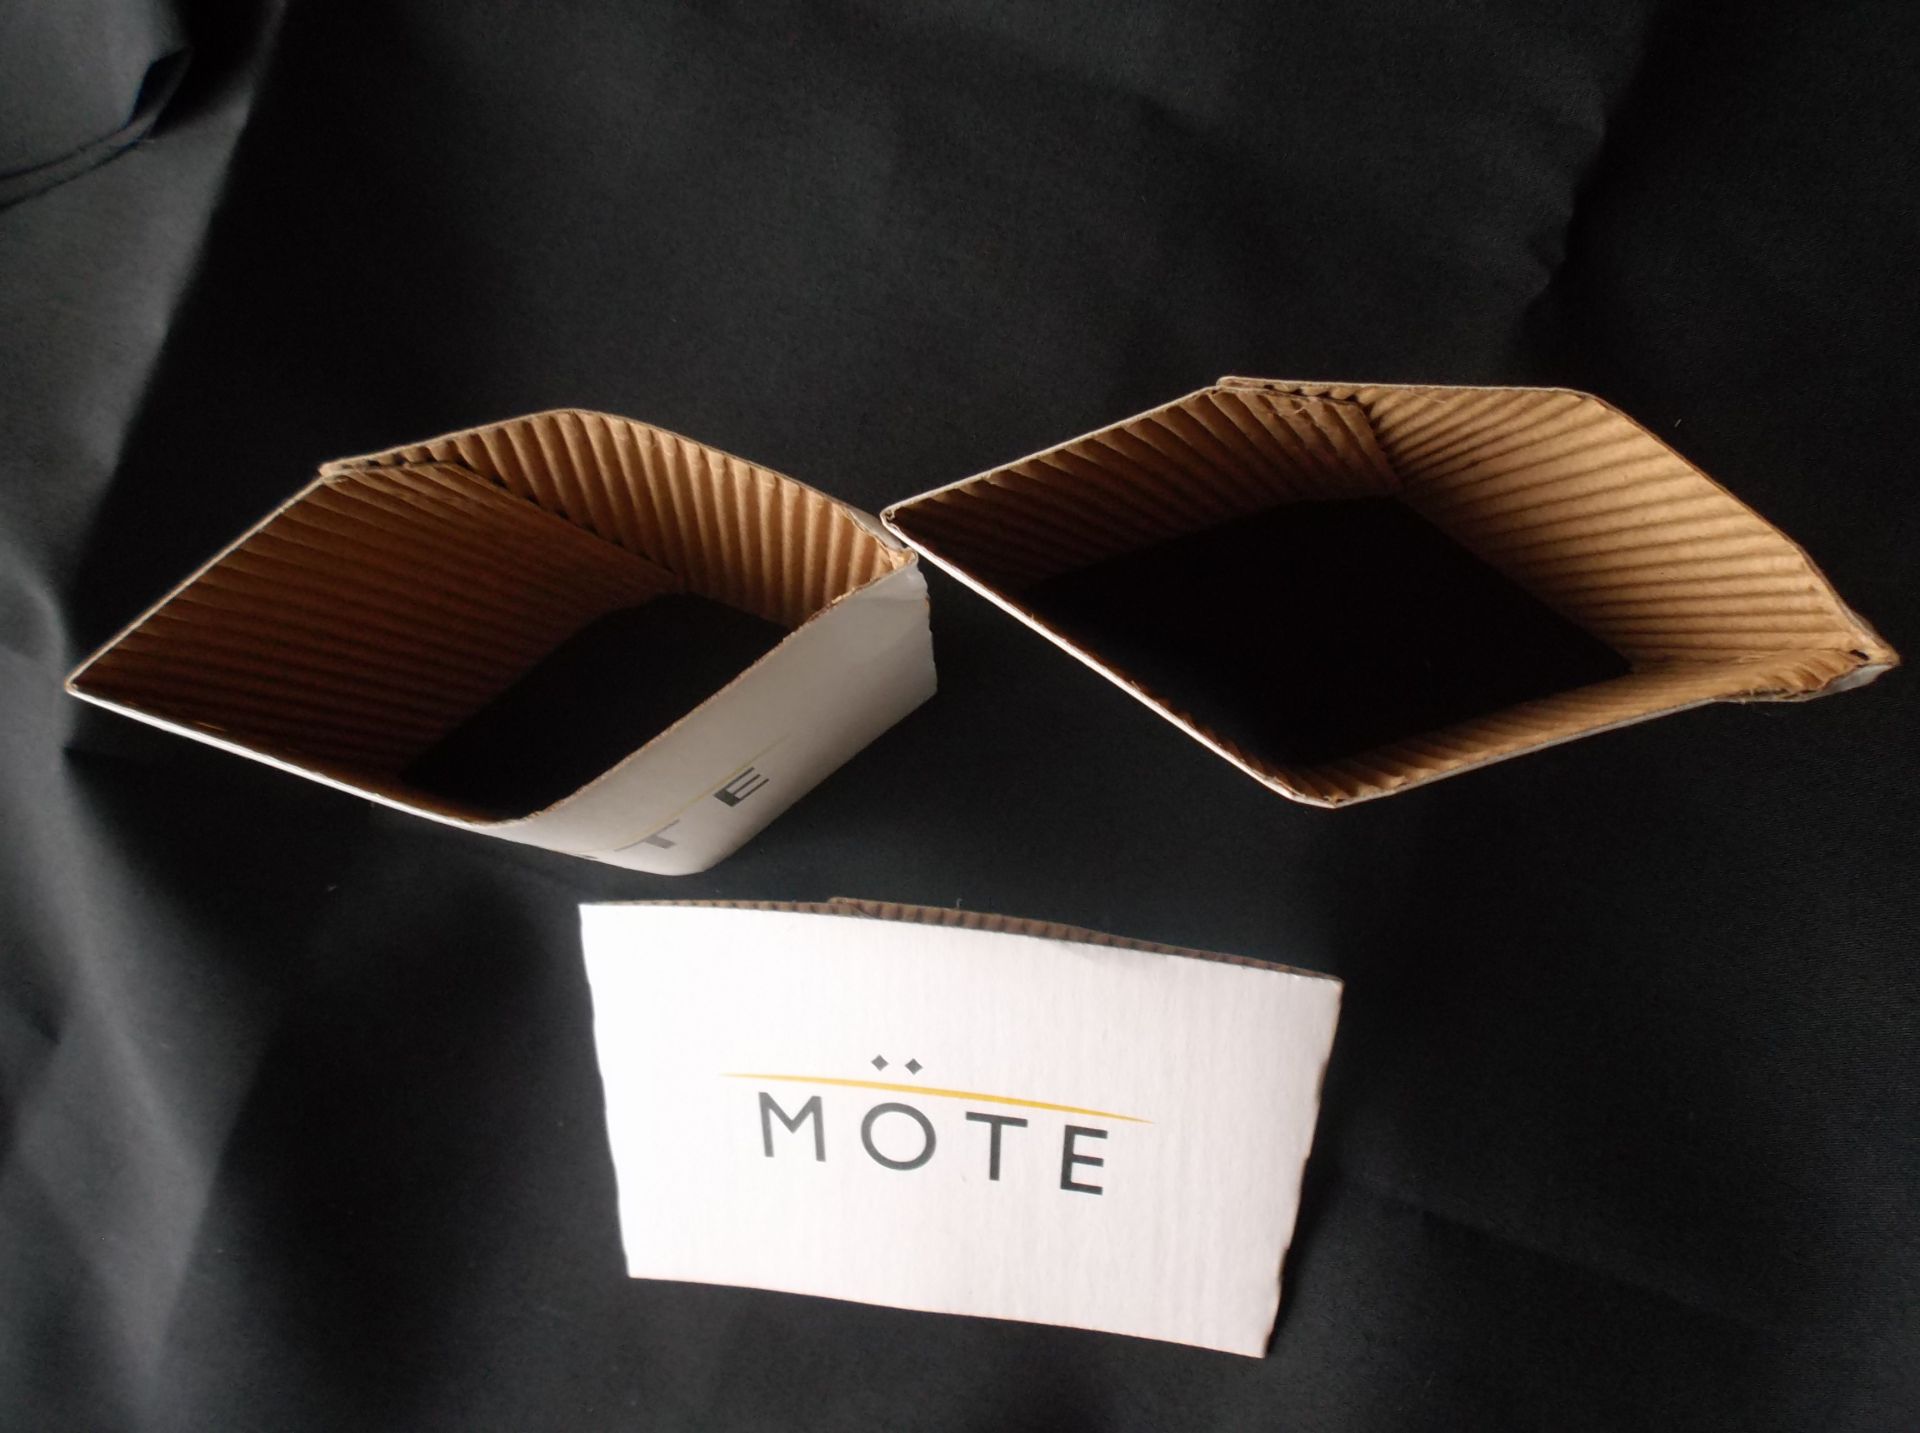 1 Bx Of 1,000 Mote Cup Cluches/Holders 8Oz-10Oz - Image 2 of 2